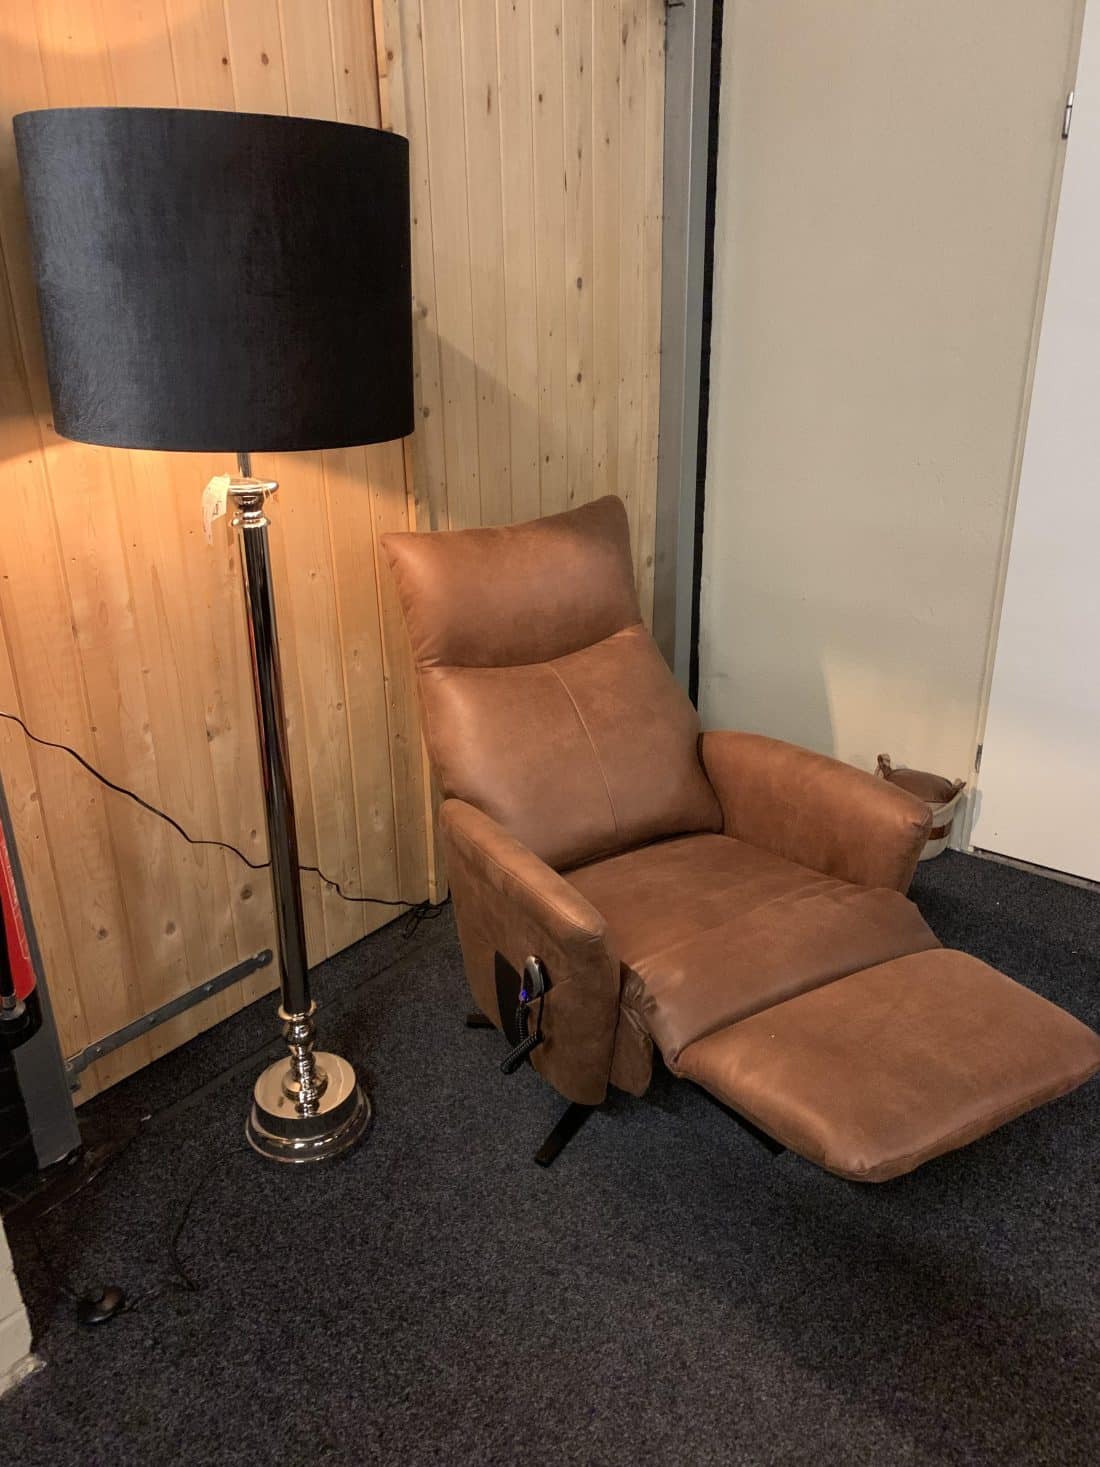 Relaxfauteuil Amsterdam Microleder